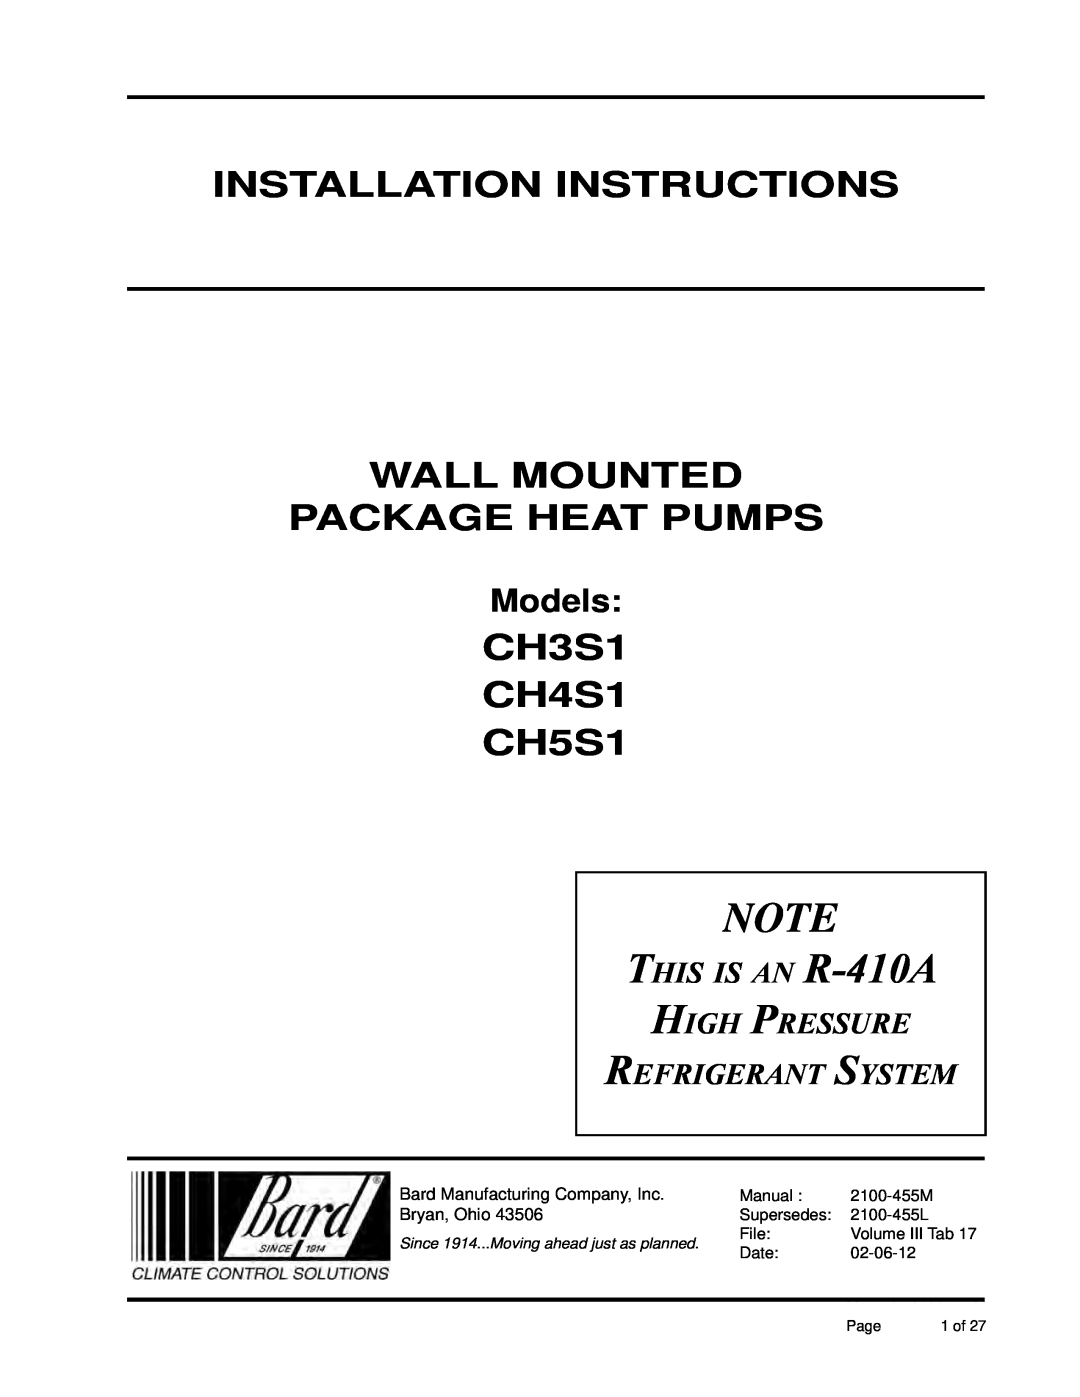 Bard installation instructions Installation Instructions Wall Mounted, Package Heat Pumps, CH3S1 CH4S1 CH5S1, Models 